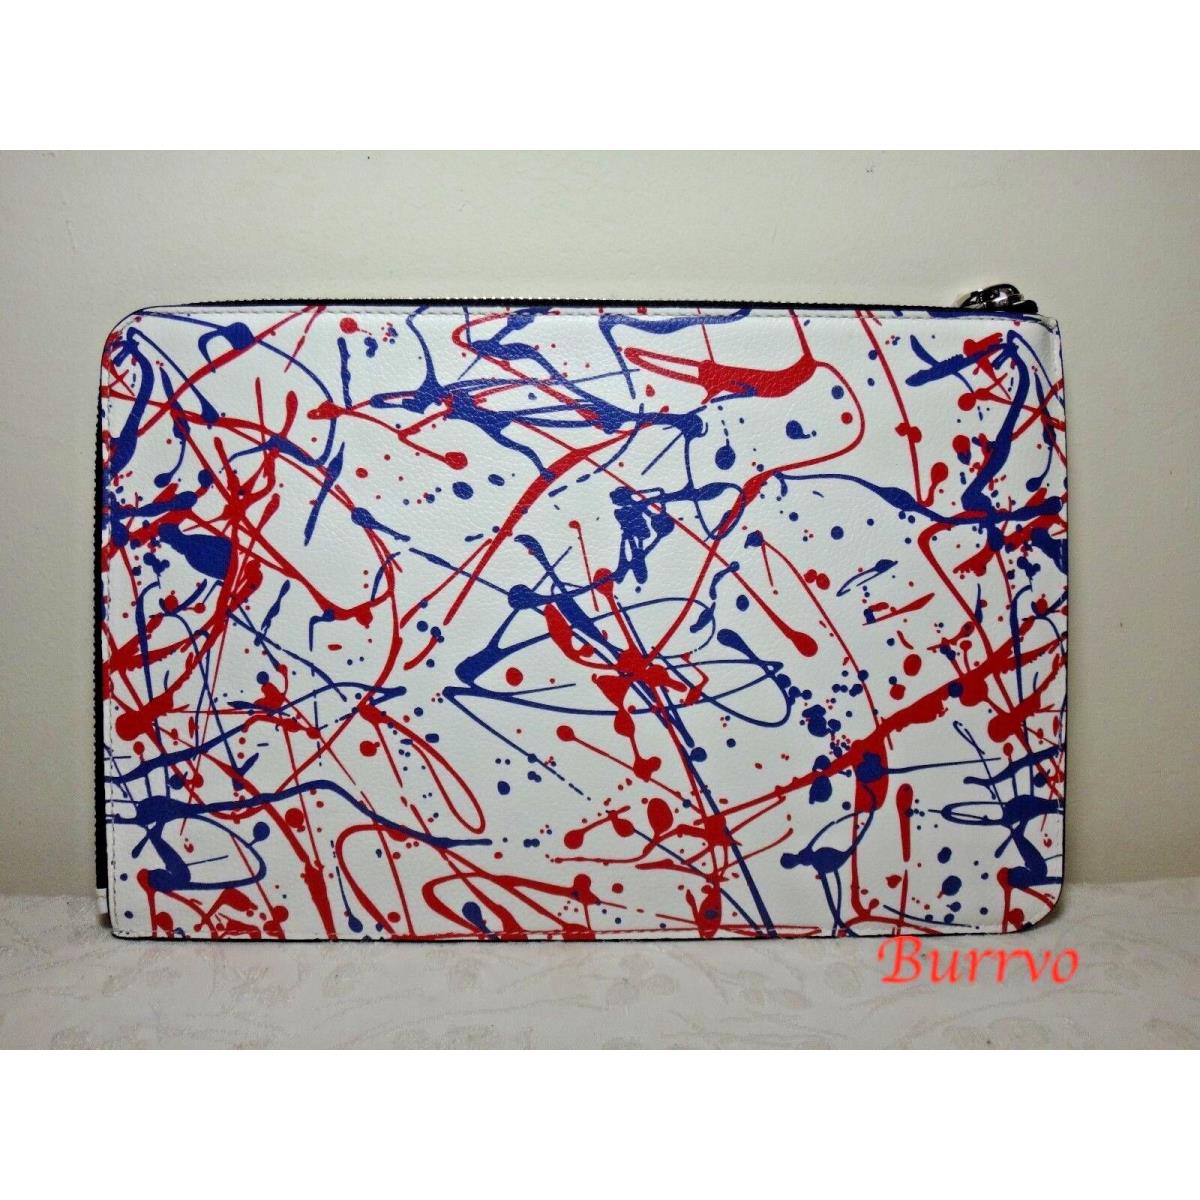 Marc By Marc Jacobs Splatter Paint Leather LG Zip Pounch White Multi